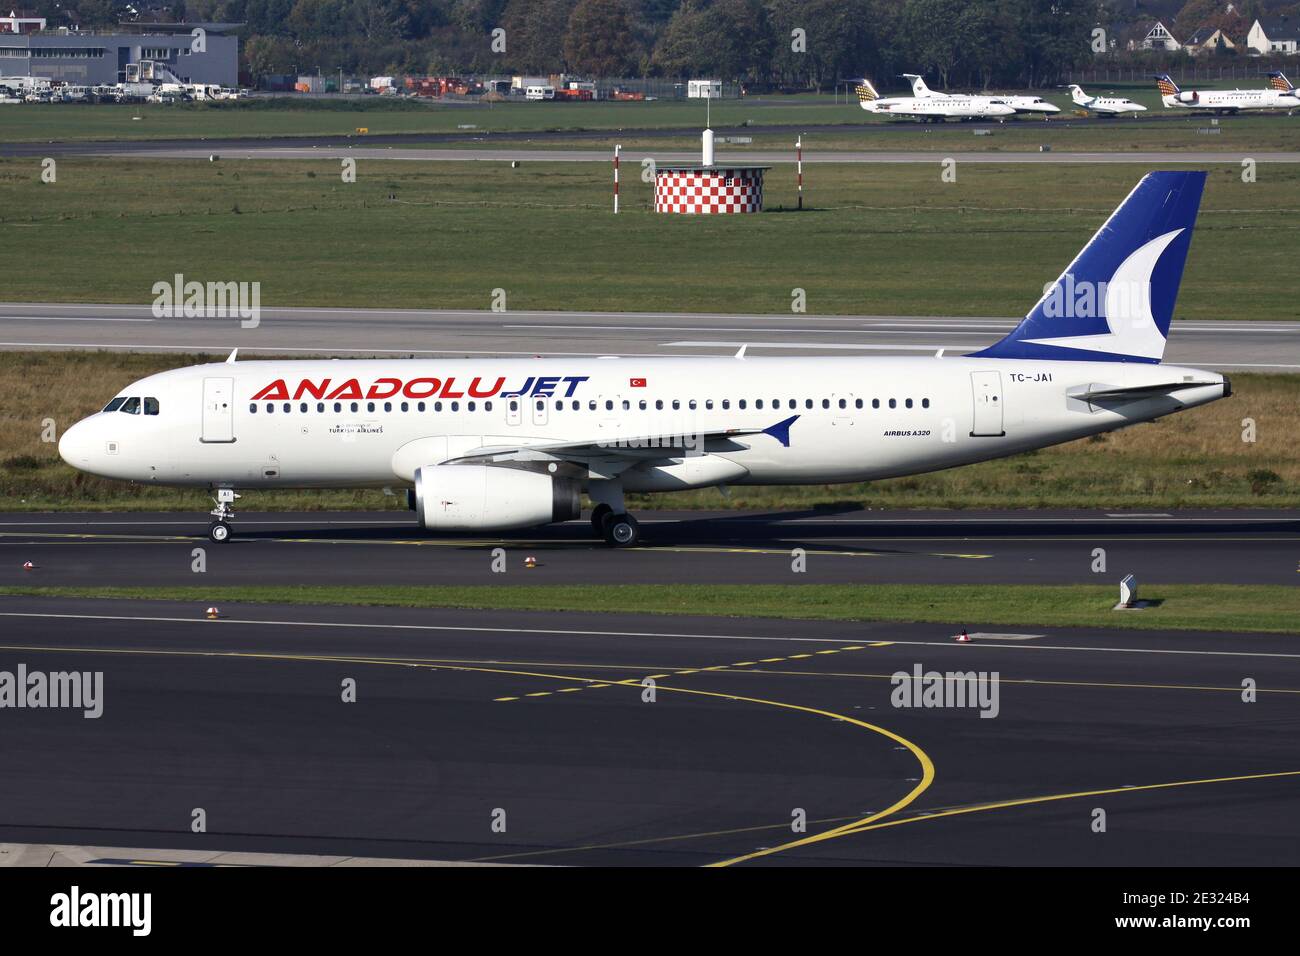 Turkish Anadolu Jet Airbus A320-200 with registration TC-JAI on taxiway at Dusseldorf Airport. Stock Photo